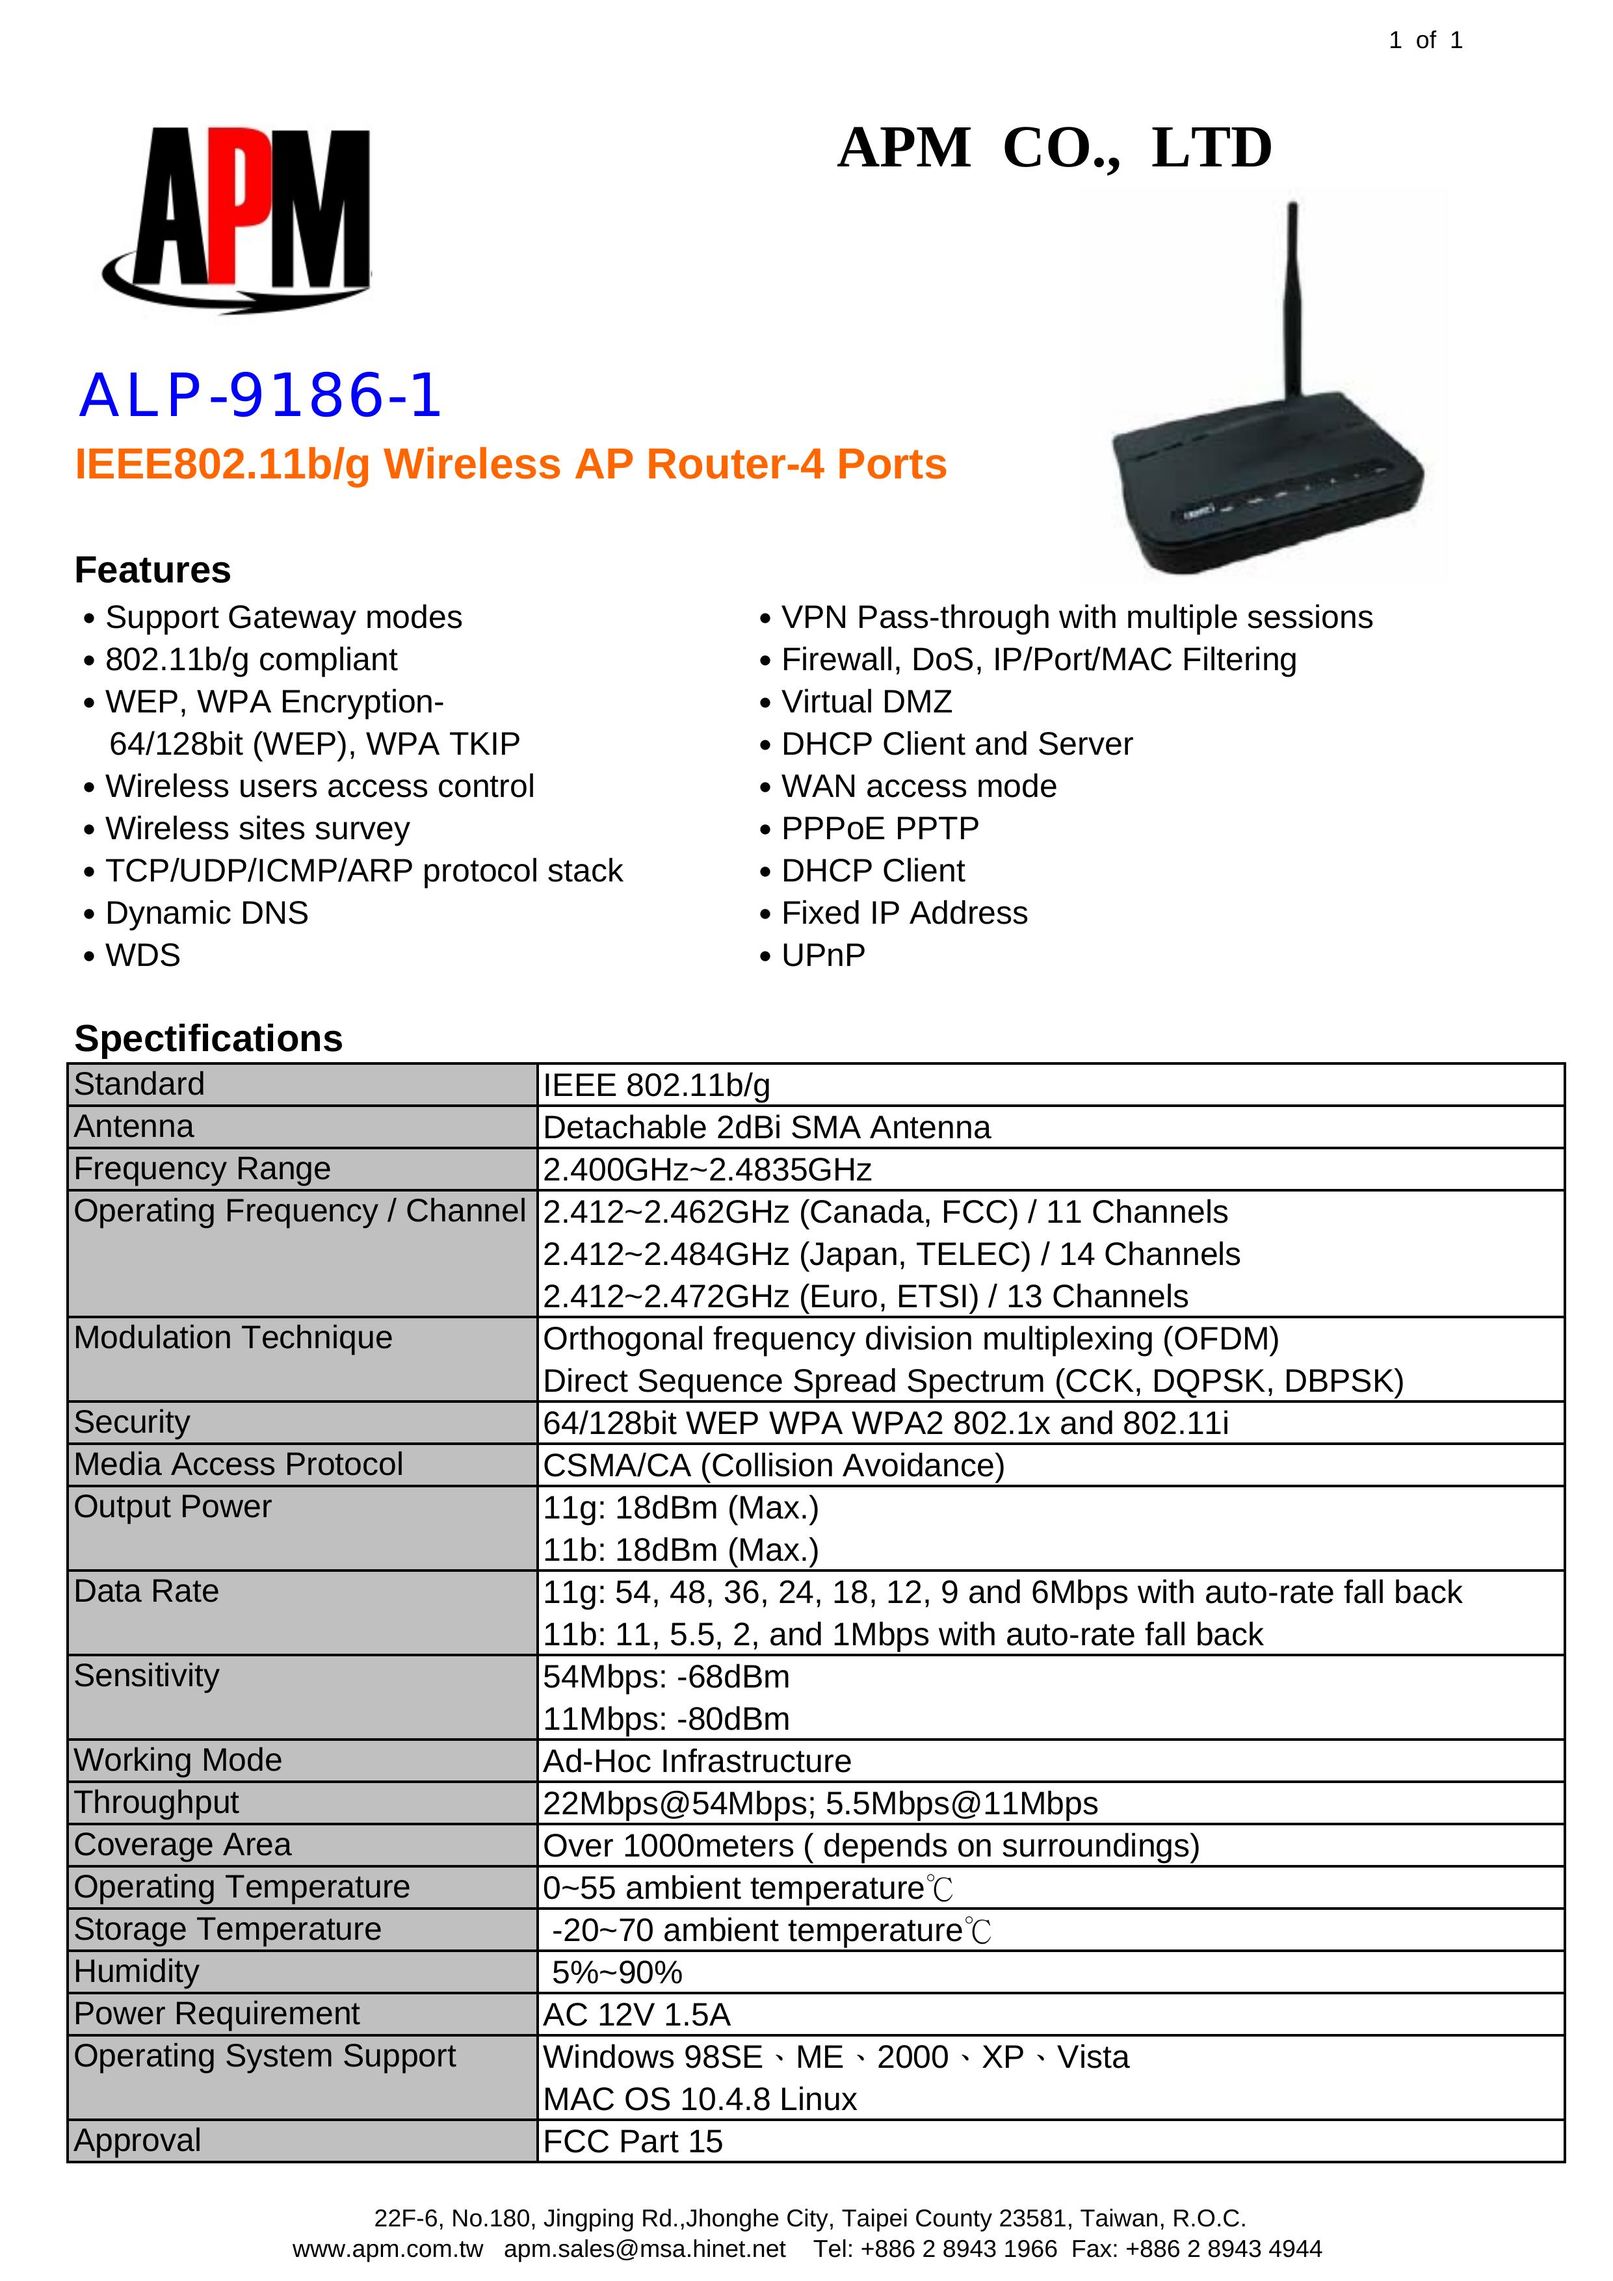 APM ALP-9186-1 Network Router User Manual